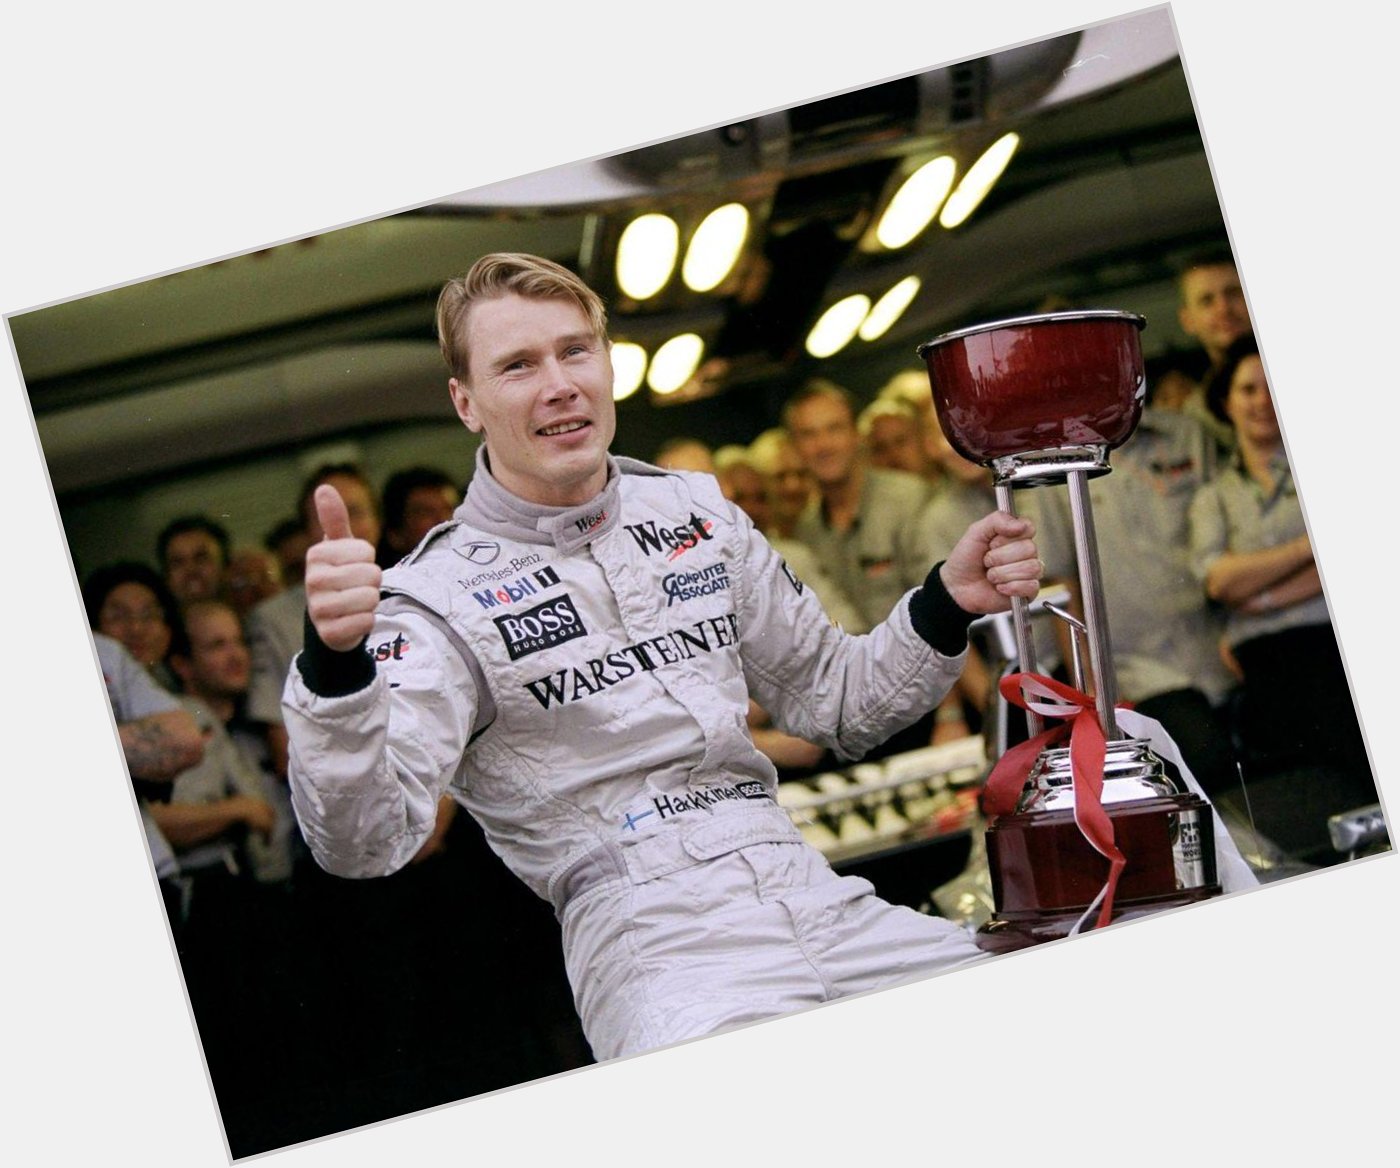 Happy Birthday Mika Hakkinen, hope to see you end your sabbatical soon 